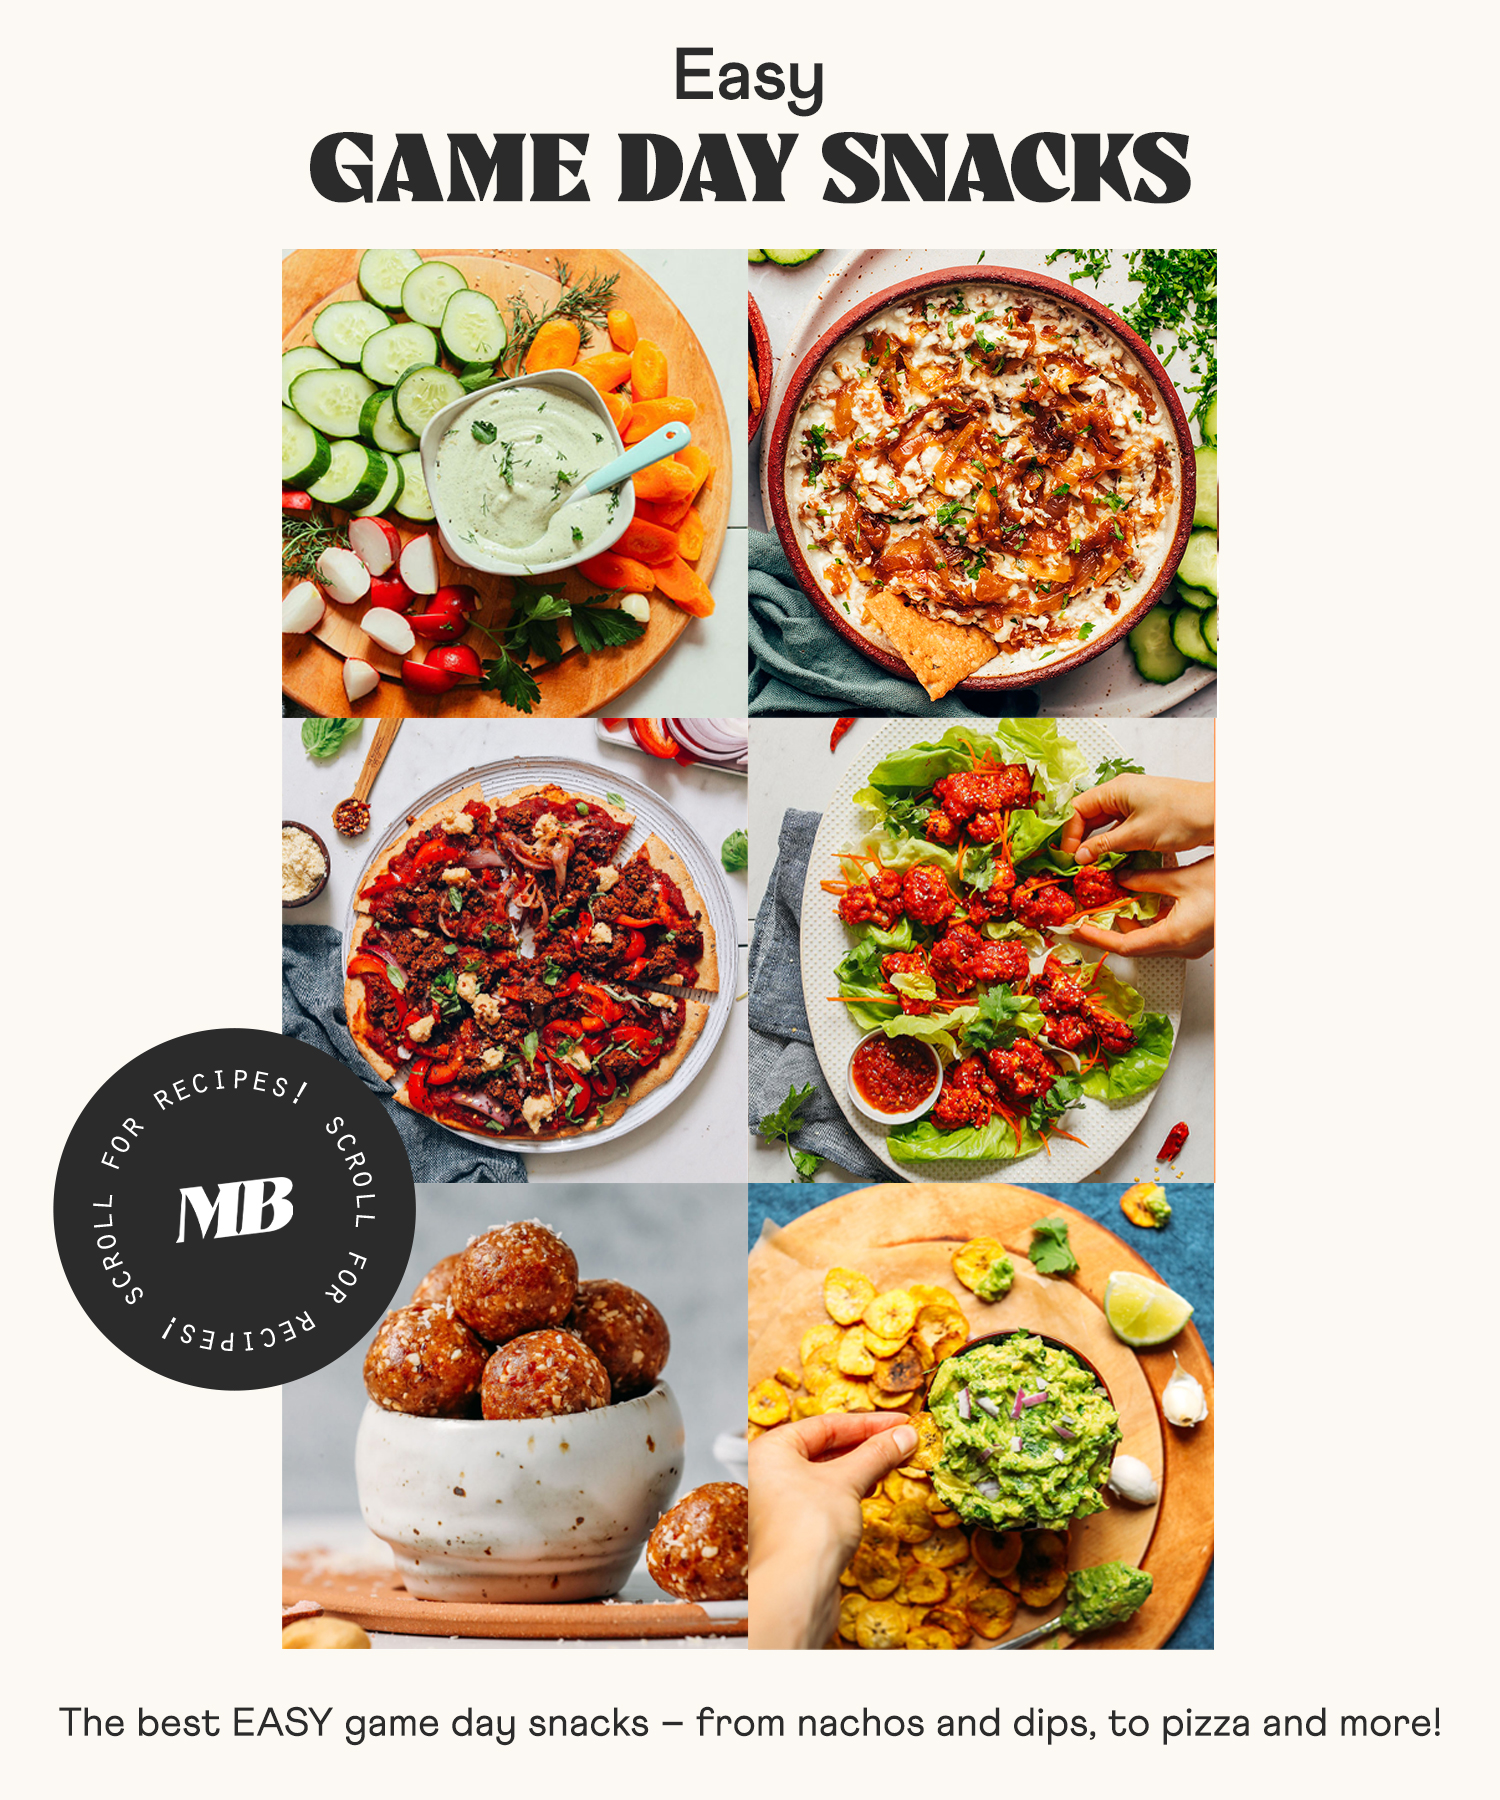 Image of easy game day snacks